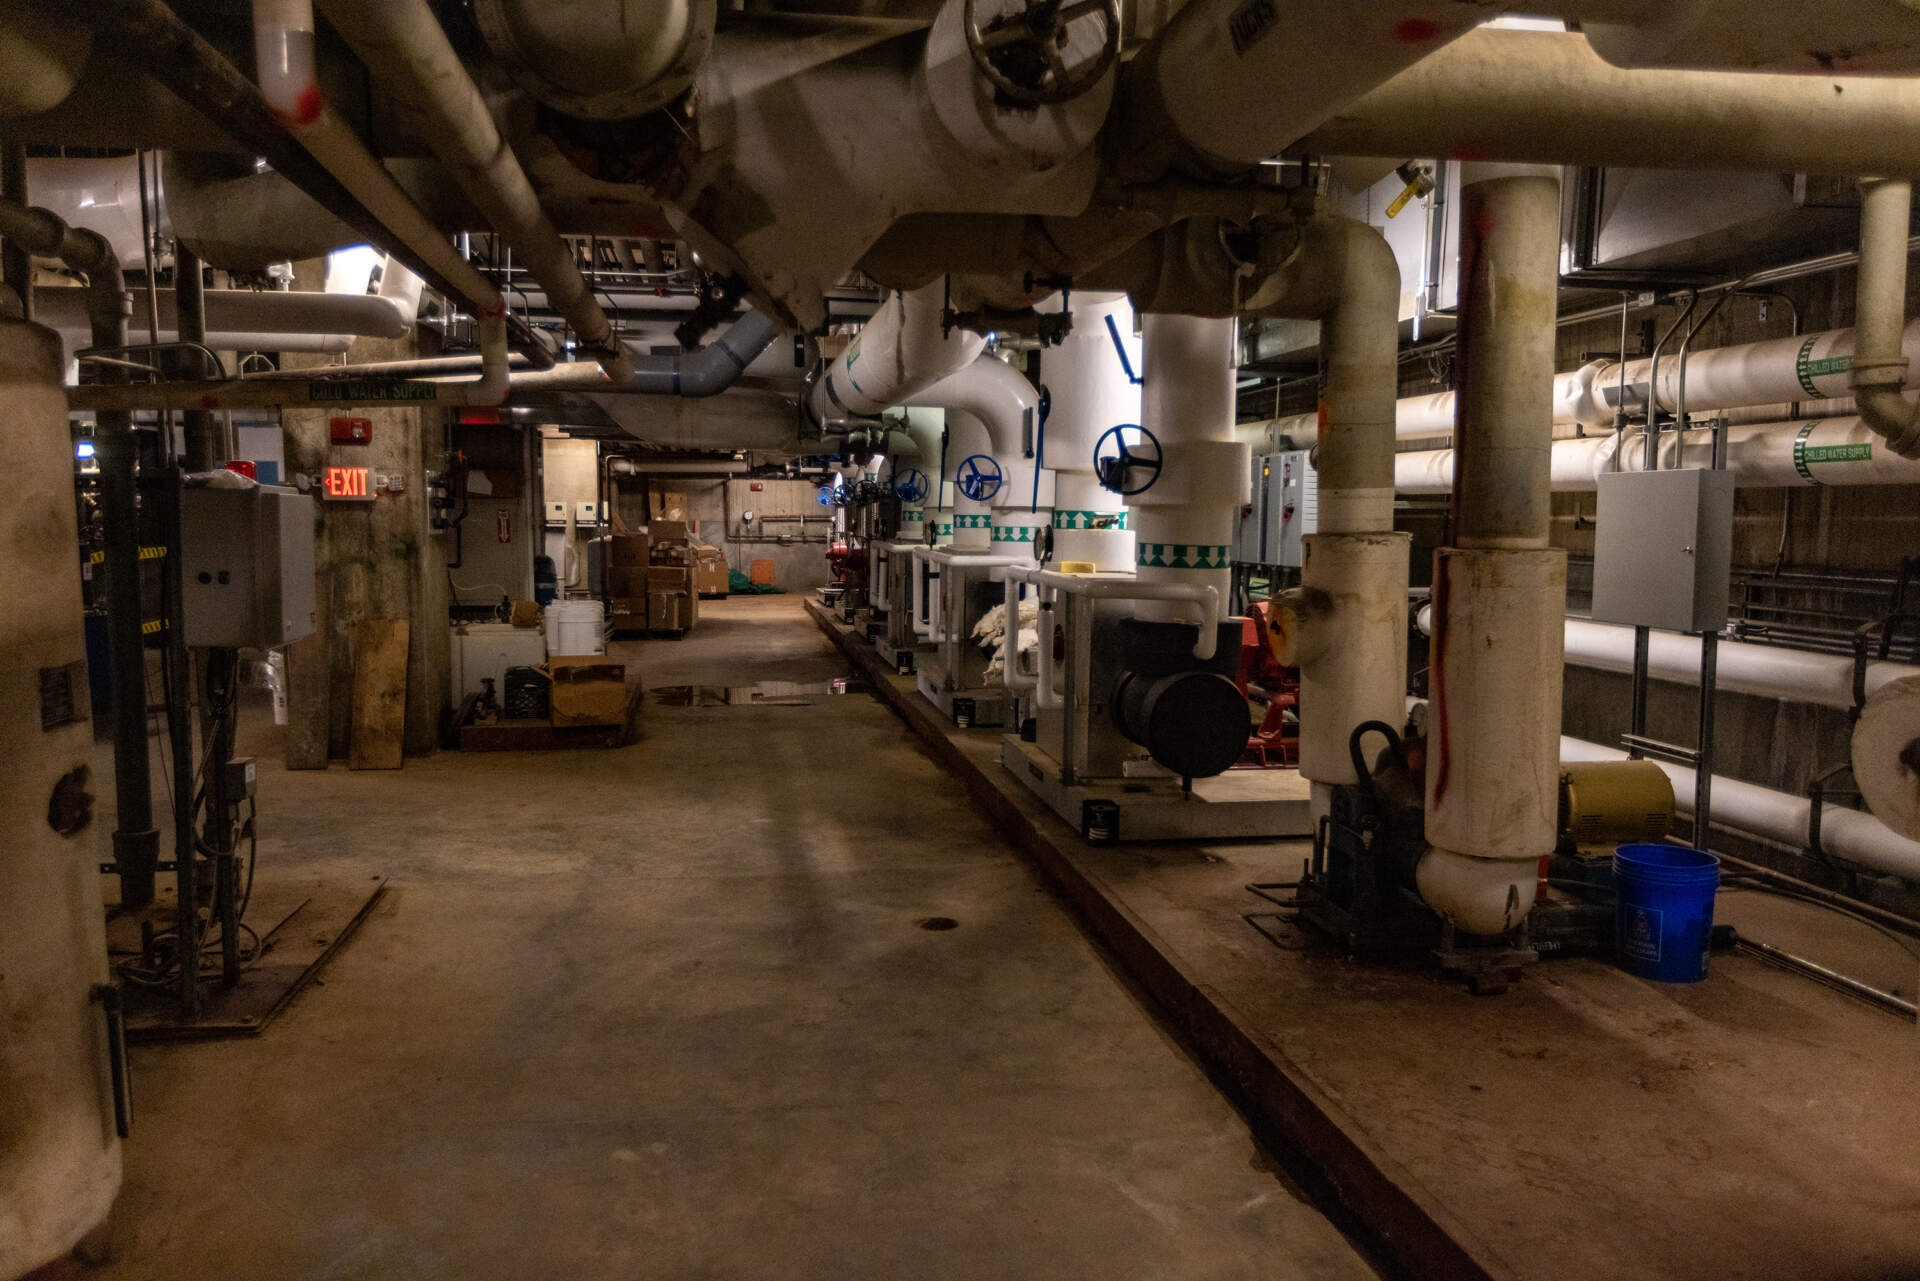 Pipes carrying chilled water in the basement of Boston City Hall. (Jesse Costa/WBUR)